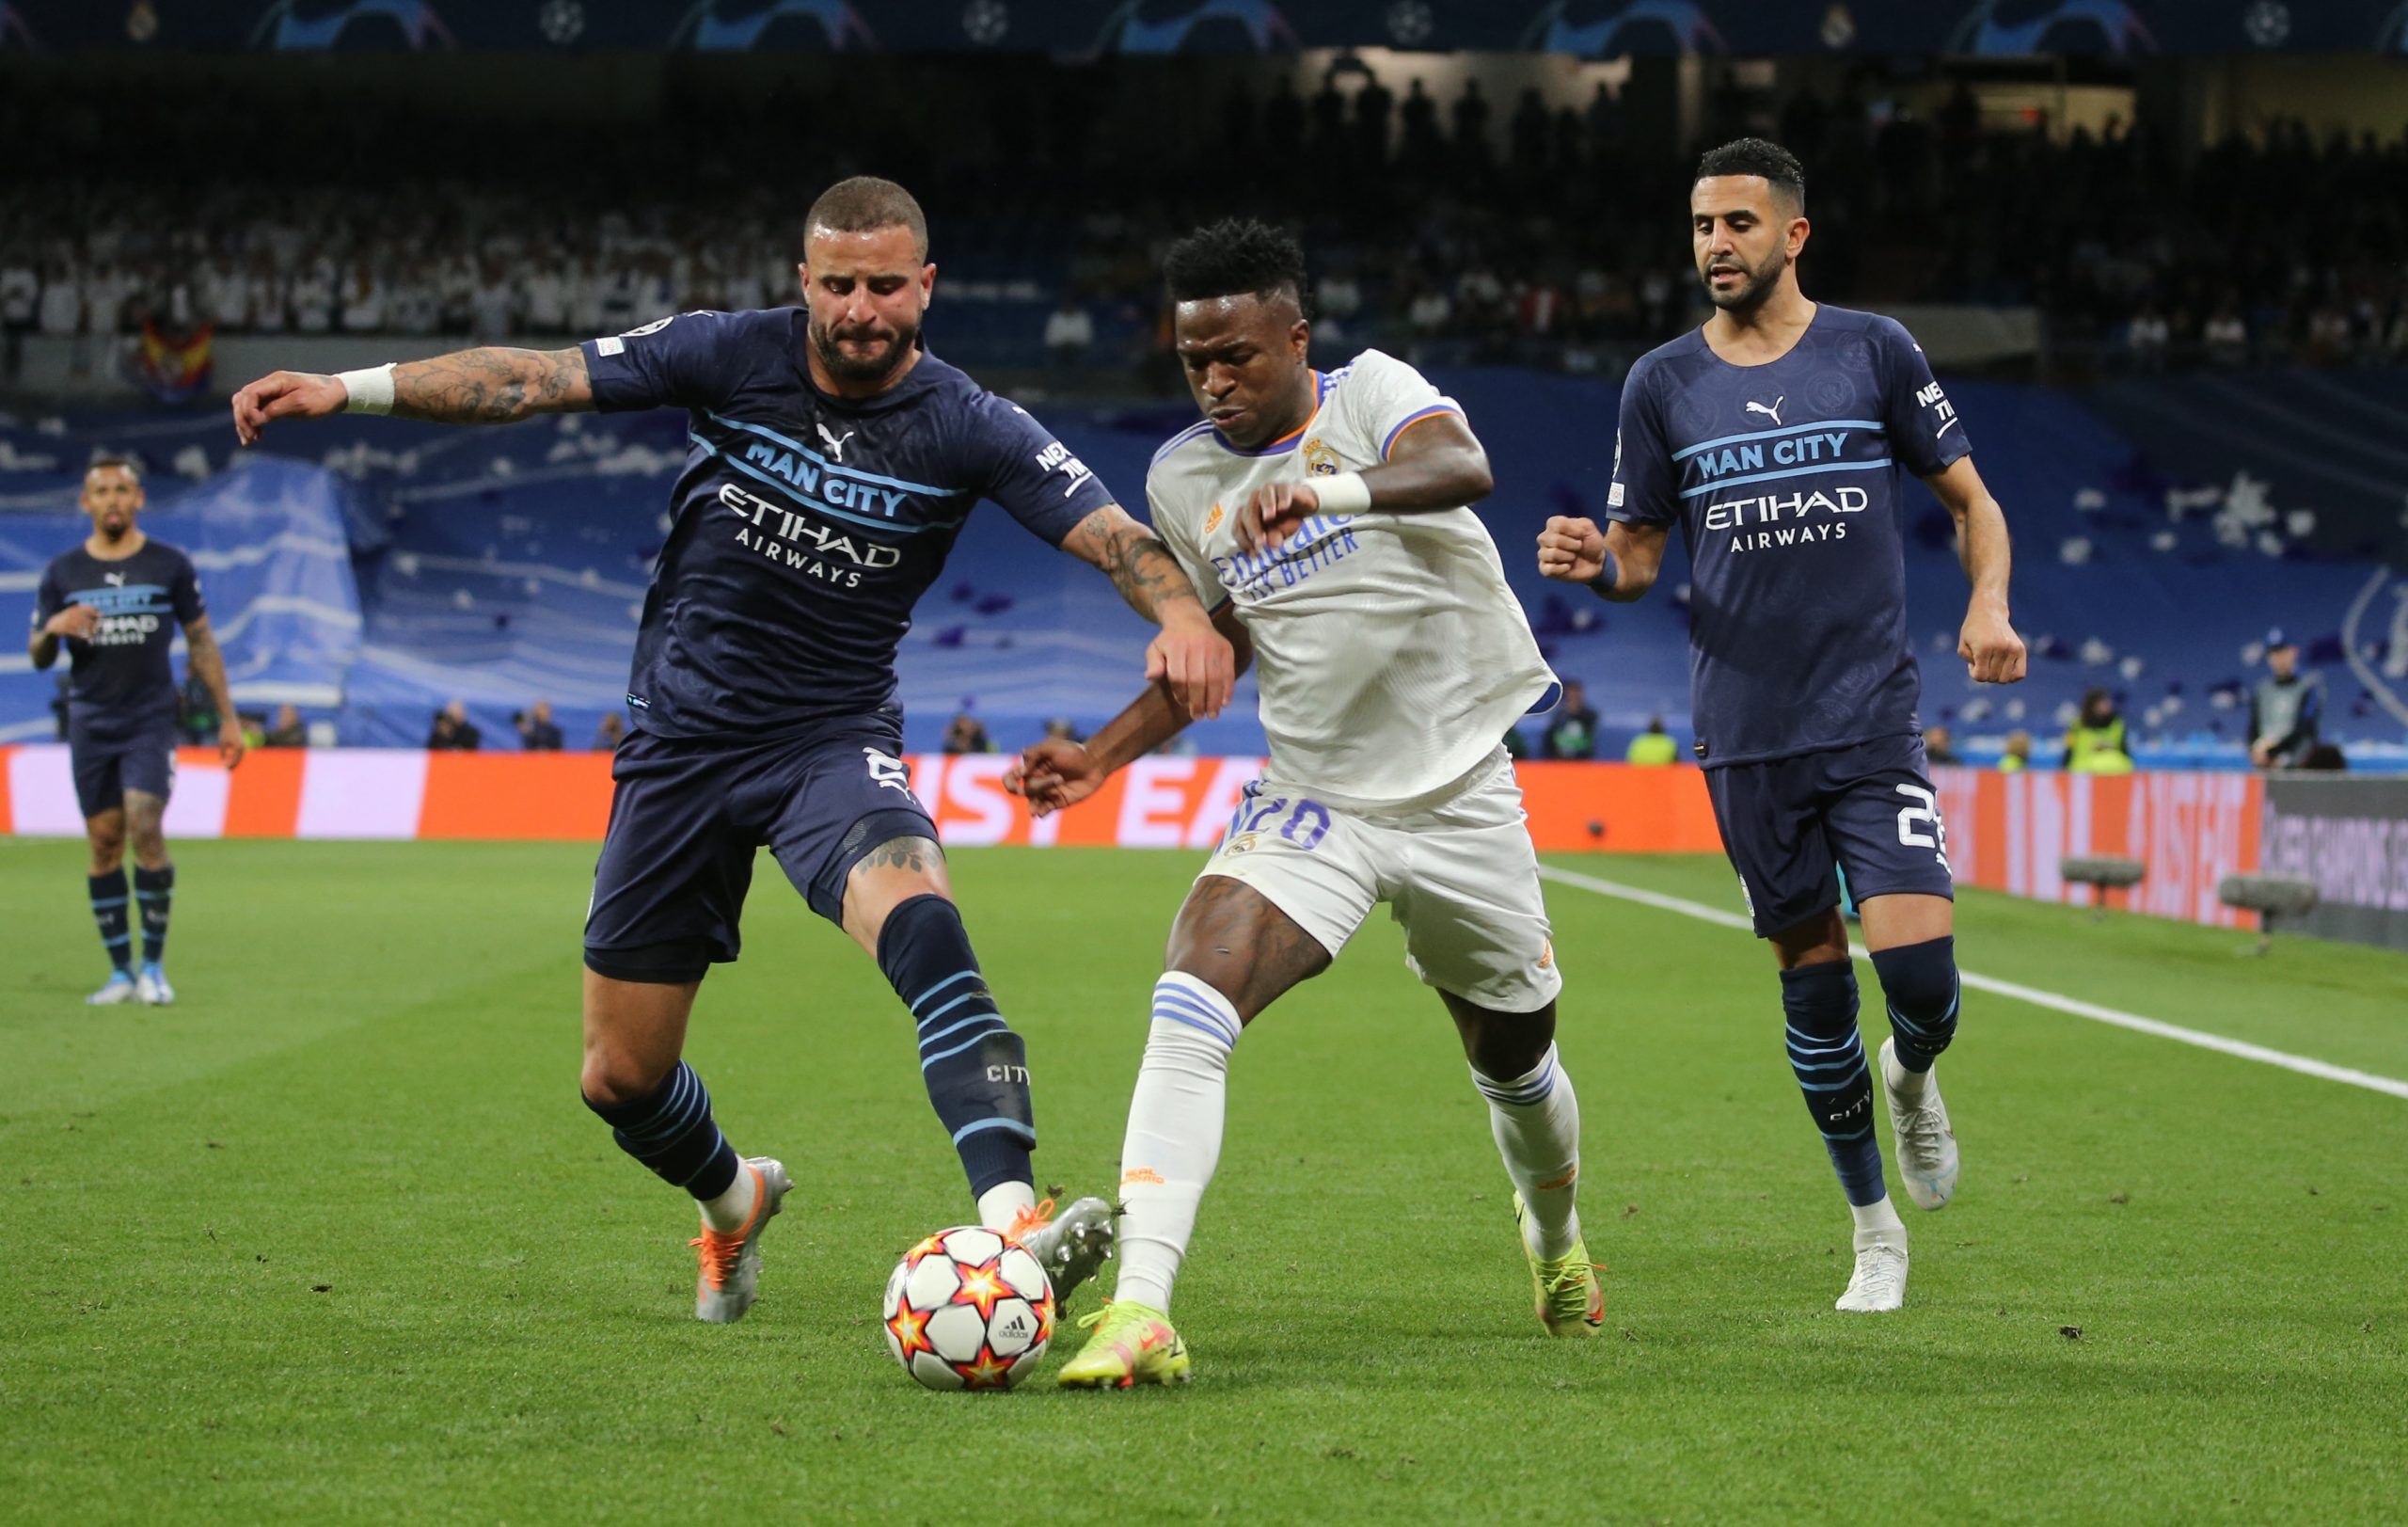 Soccer Football - Champions League - Semi Final - Second Leg - Real Madrid v Manchester City - Santiago Bernabeu, Madrid, Spain - May 4, 2022 Real Madrid's Vinicius Junior in action with Manchester City's Kyle Walker REUTERS/Isabel Infantes